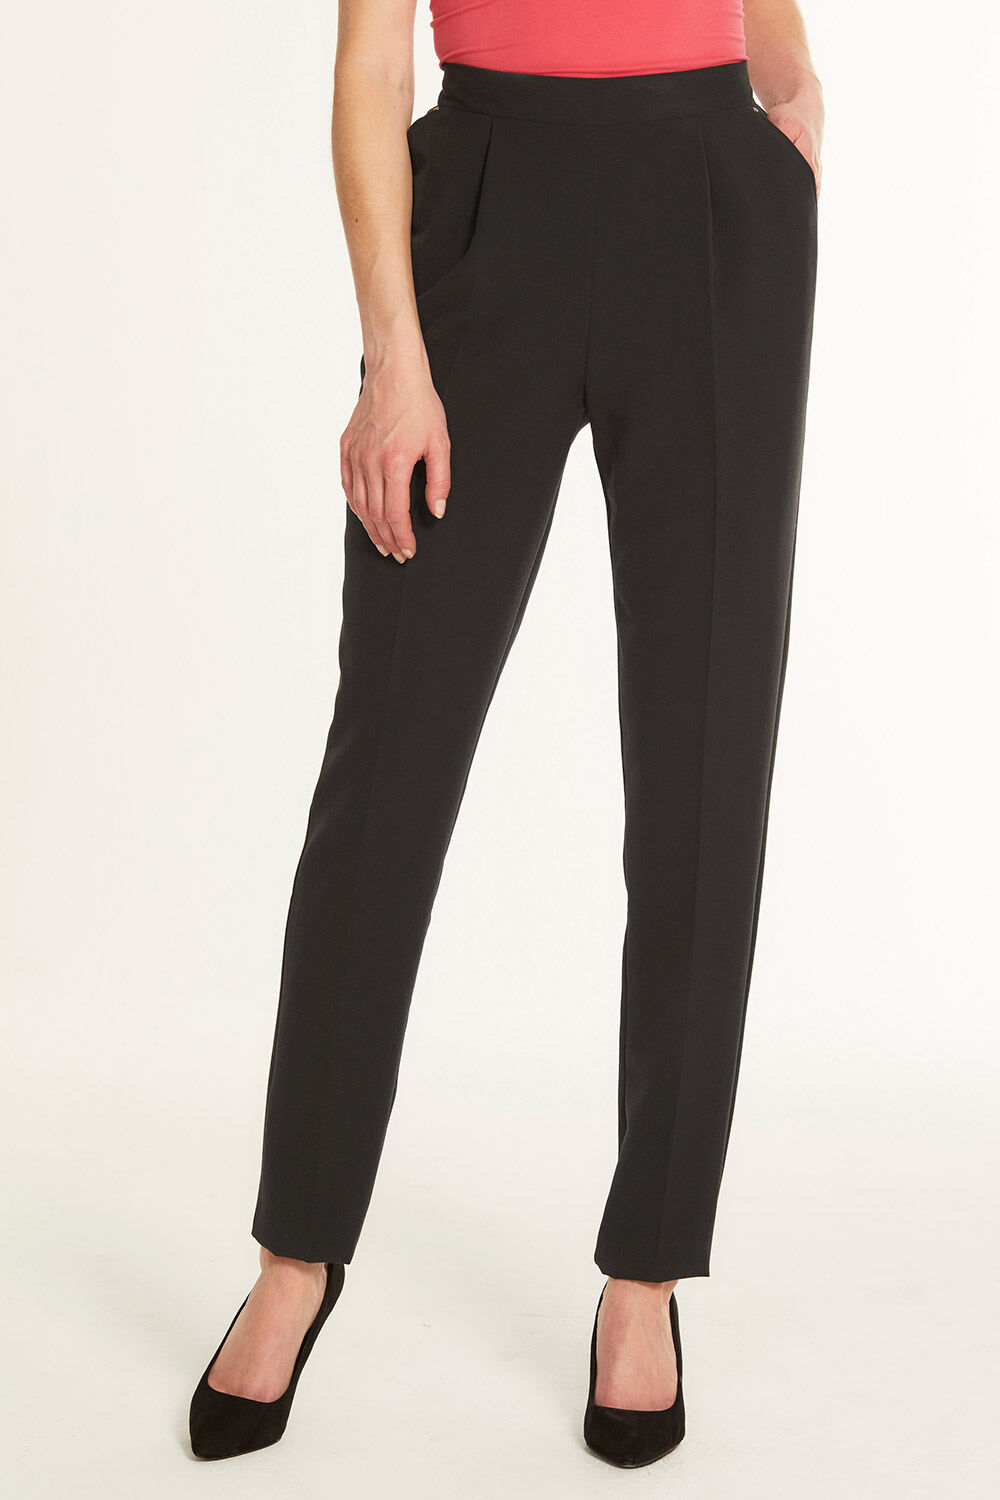 Women's Tailored Floral Jacquard Tapered Trouser | Boohoo UK